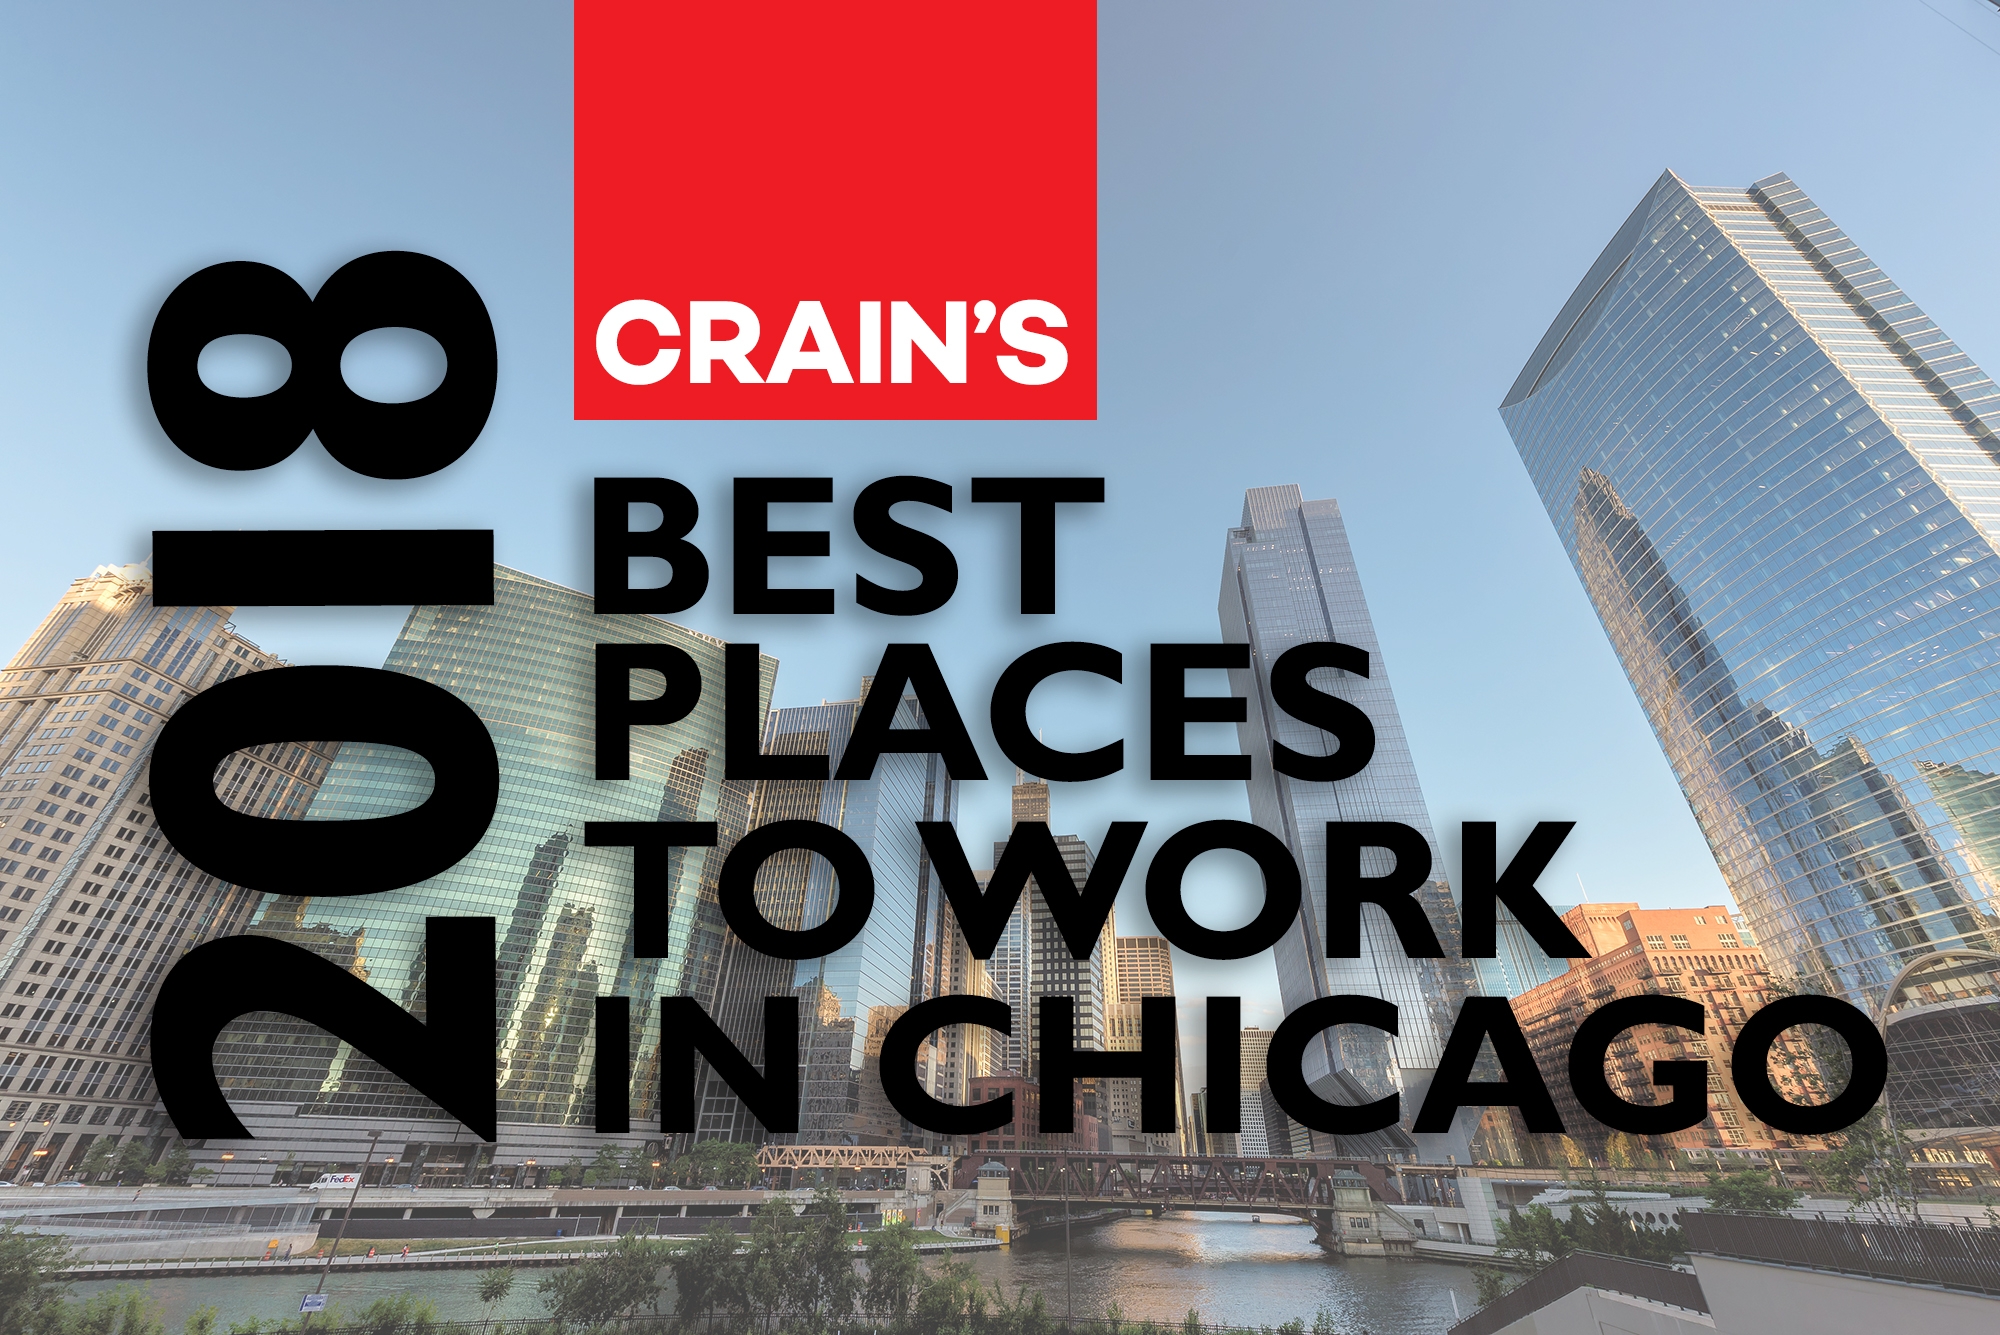 HS2 Solutions is a 2018 Crain’s Best Places to Work Winner | Bounteous